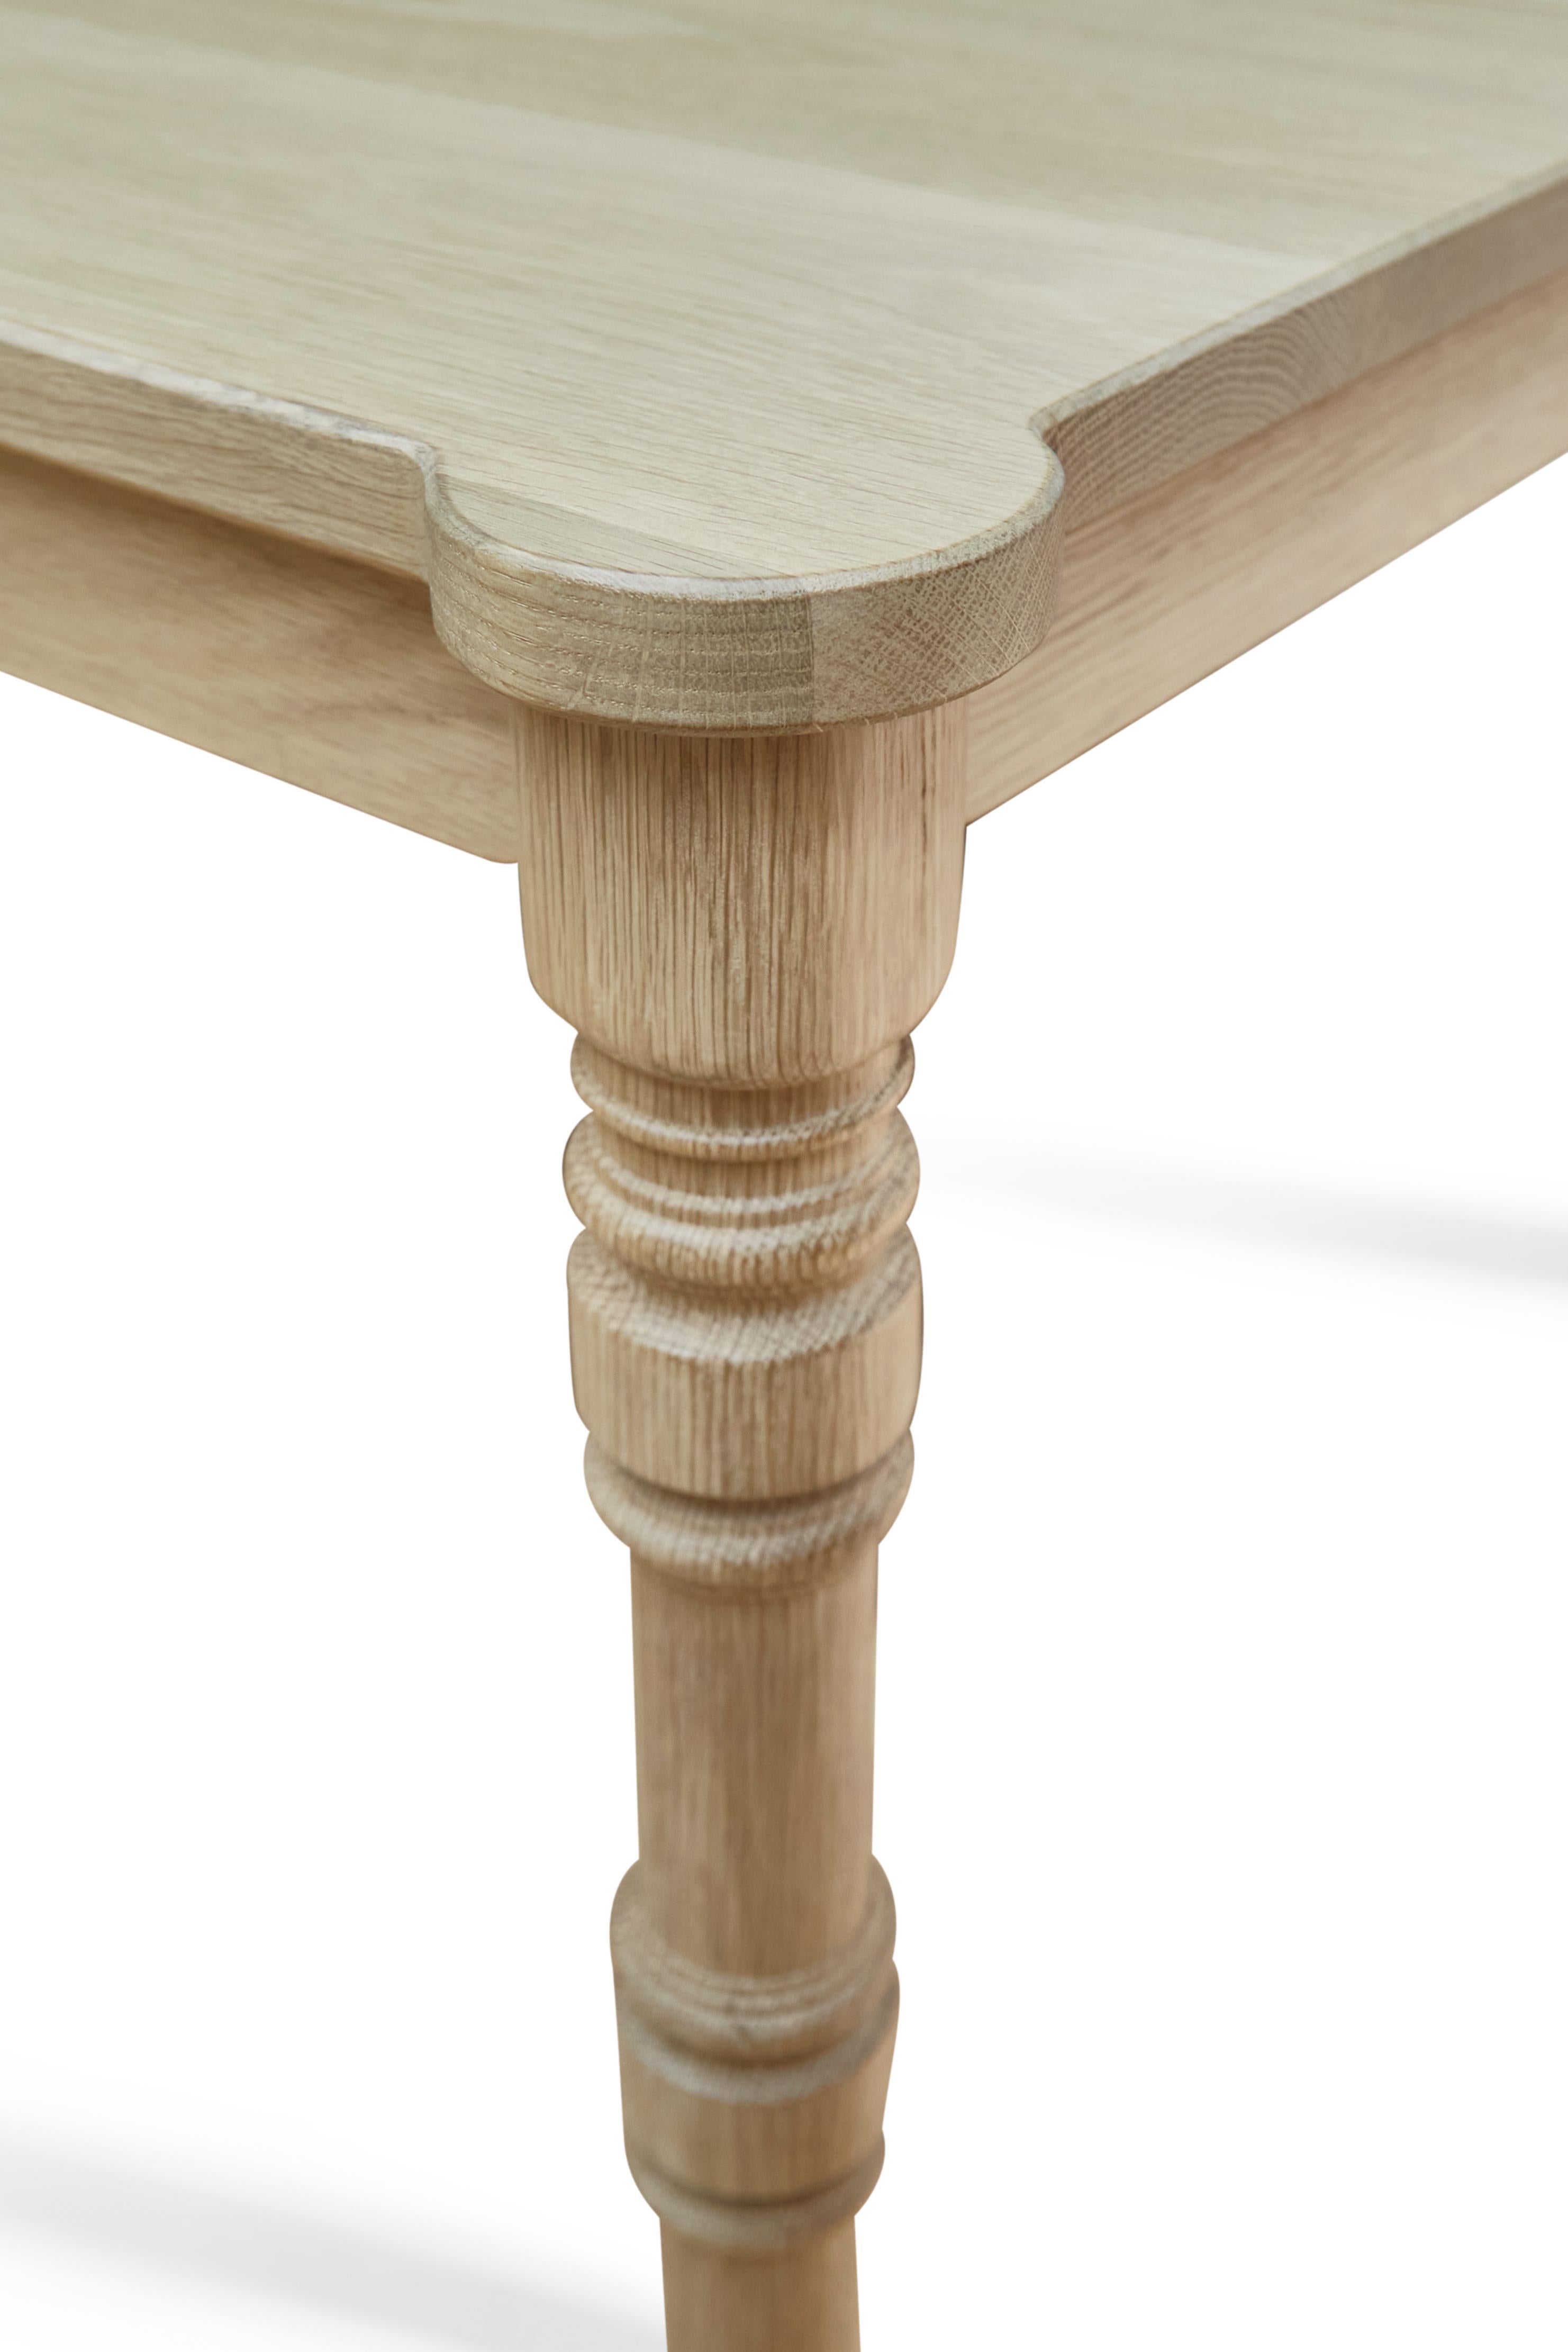 natural white oak dining table